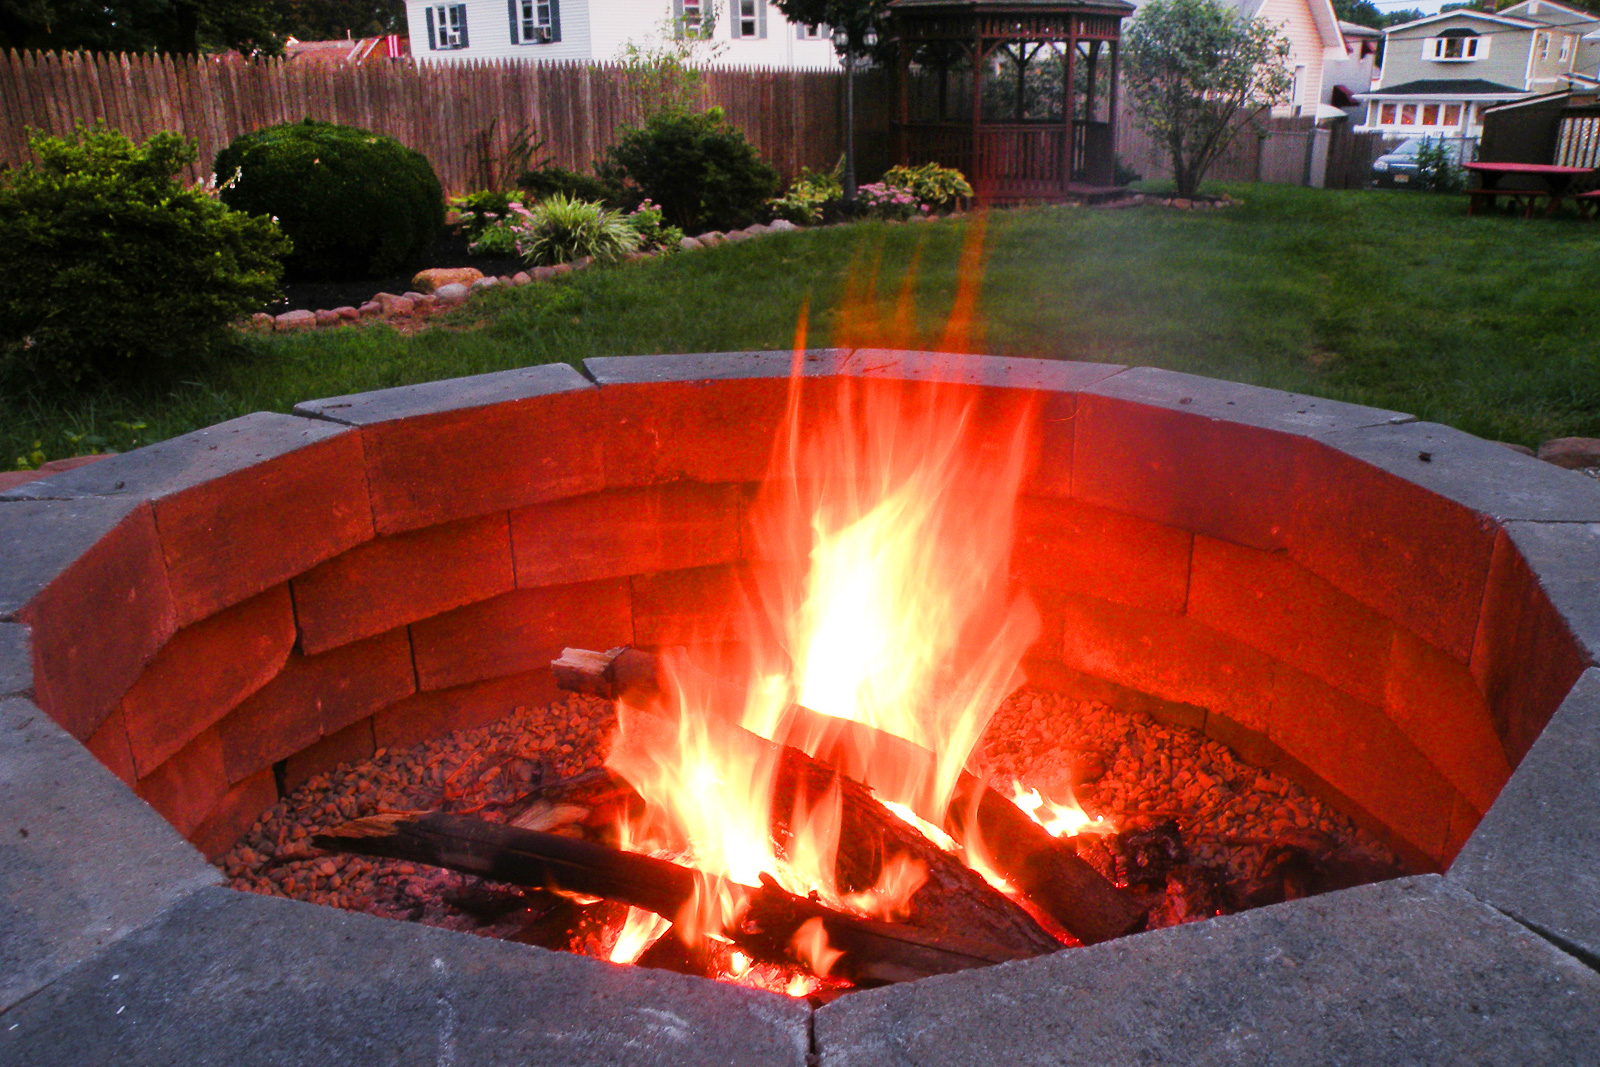 Fire pit in a back yard